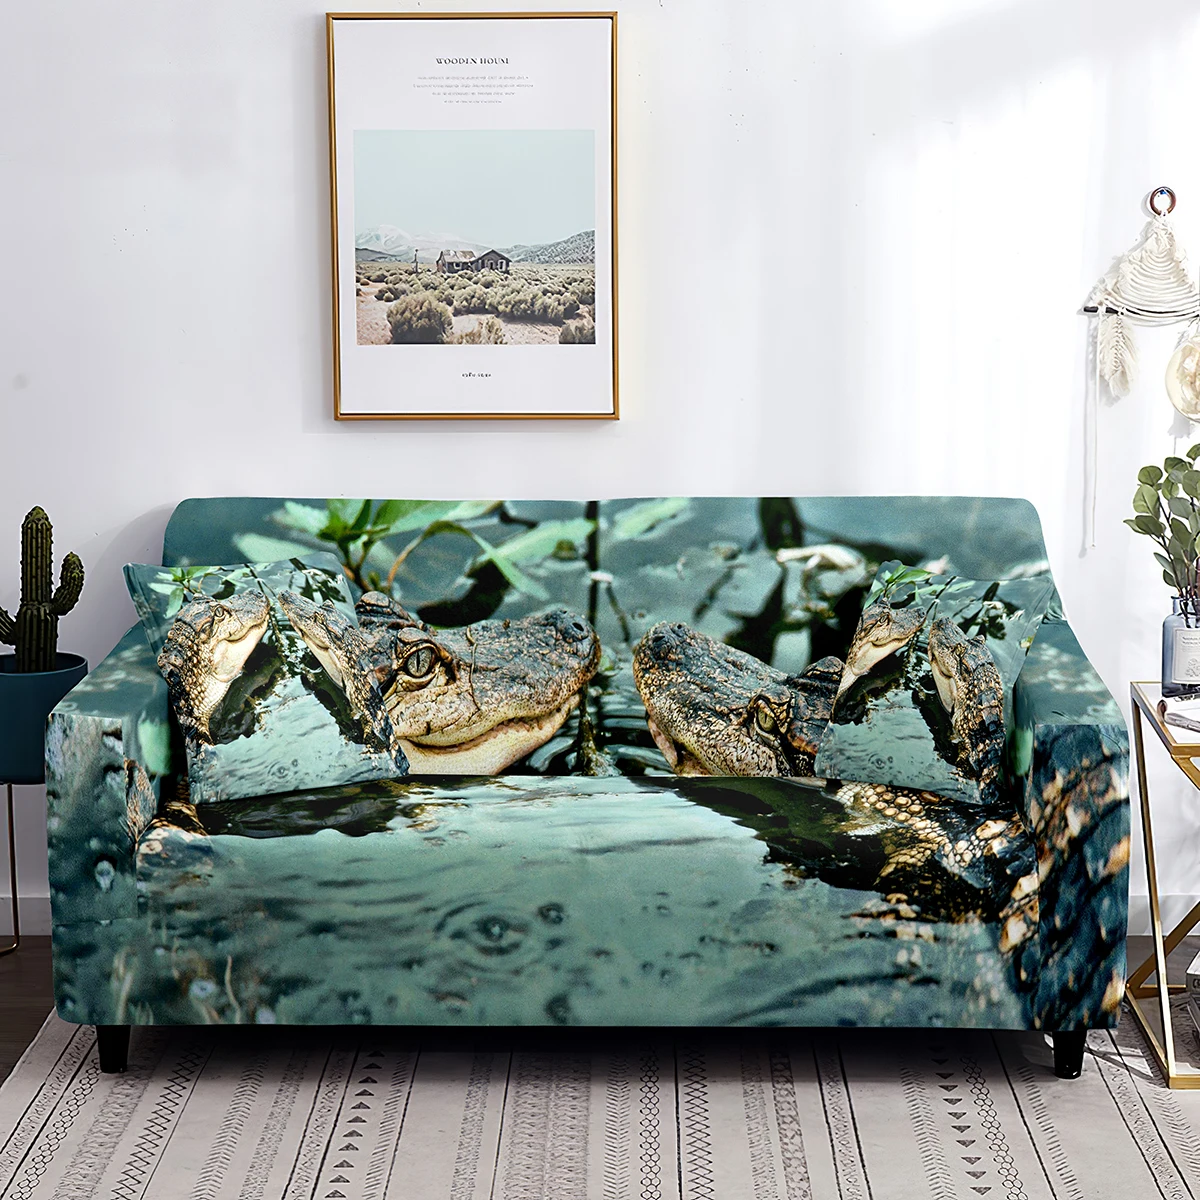 https://ae01.alicdn.com/kf/Scd329df7b4d04b40a9a60a39bf660d60Q/Crocodile-Stretch-Sofa-Cover-Wildlife-Style-Washable-Slipcover-Alligator-Printed-Furniture-Protector-for-Living-Room-Couch.jpg